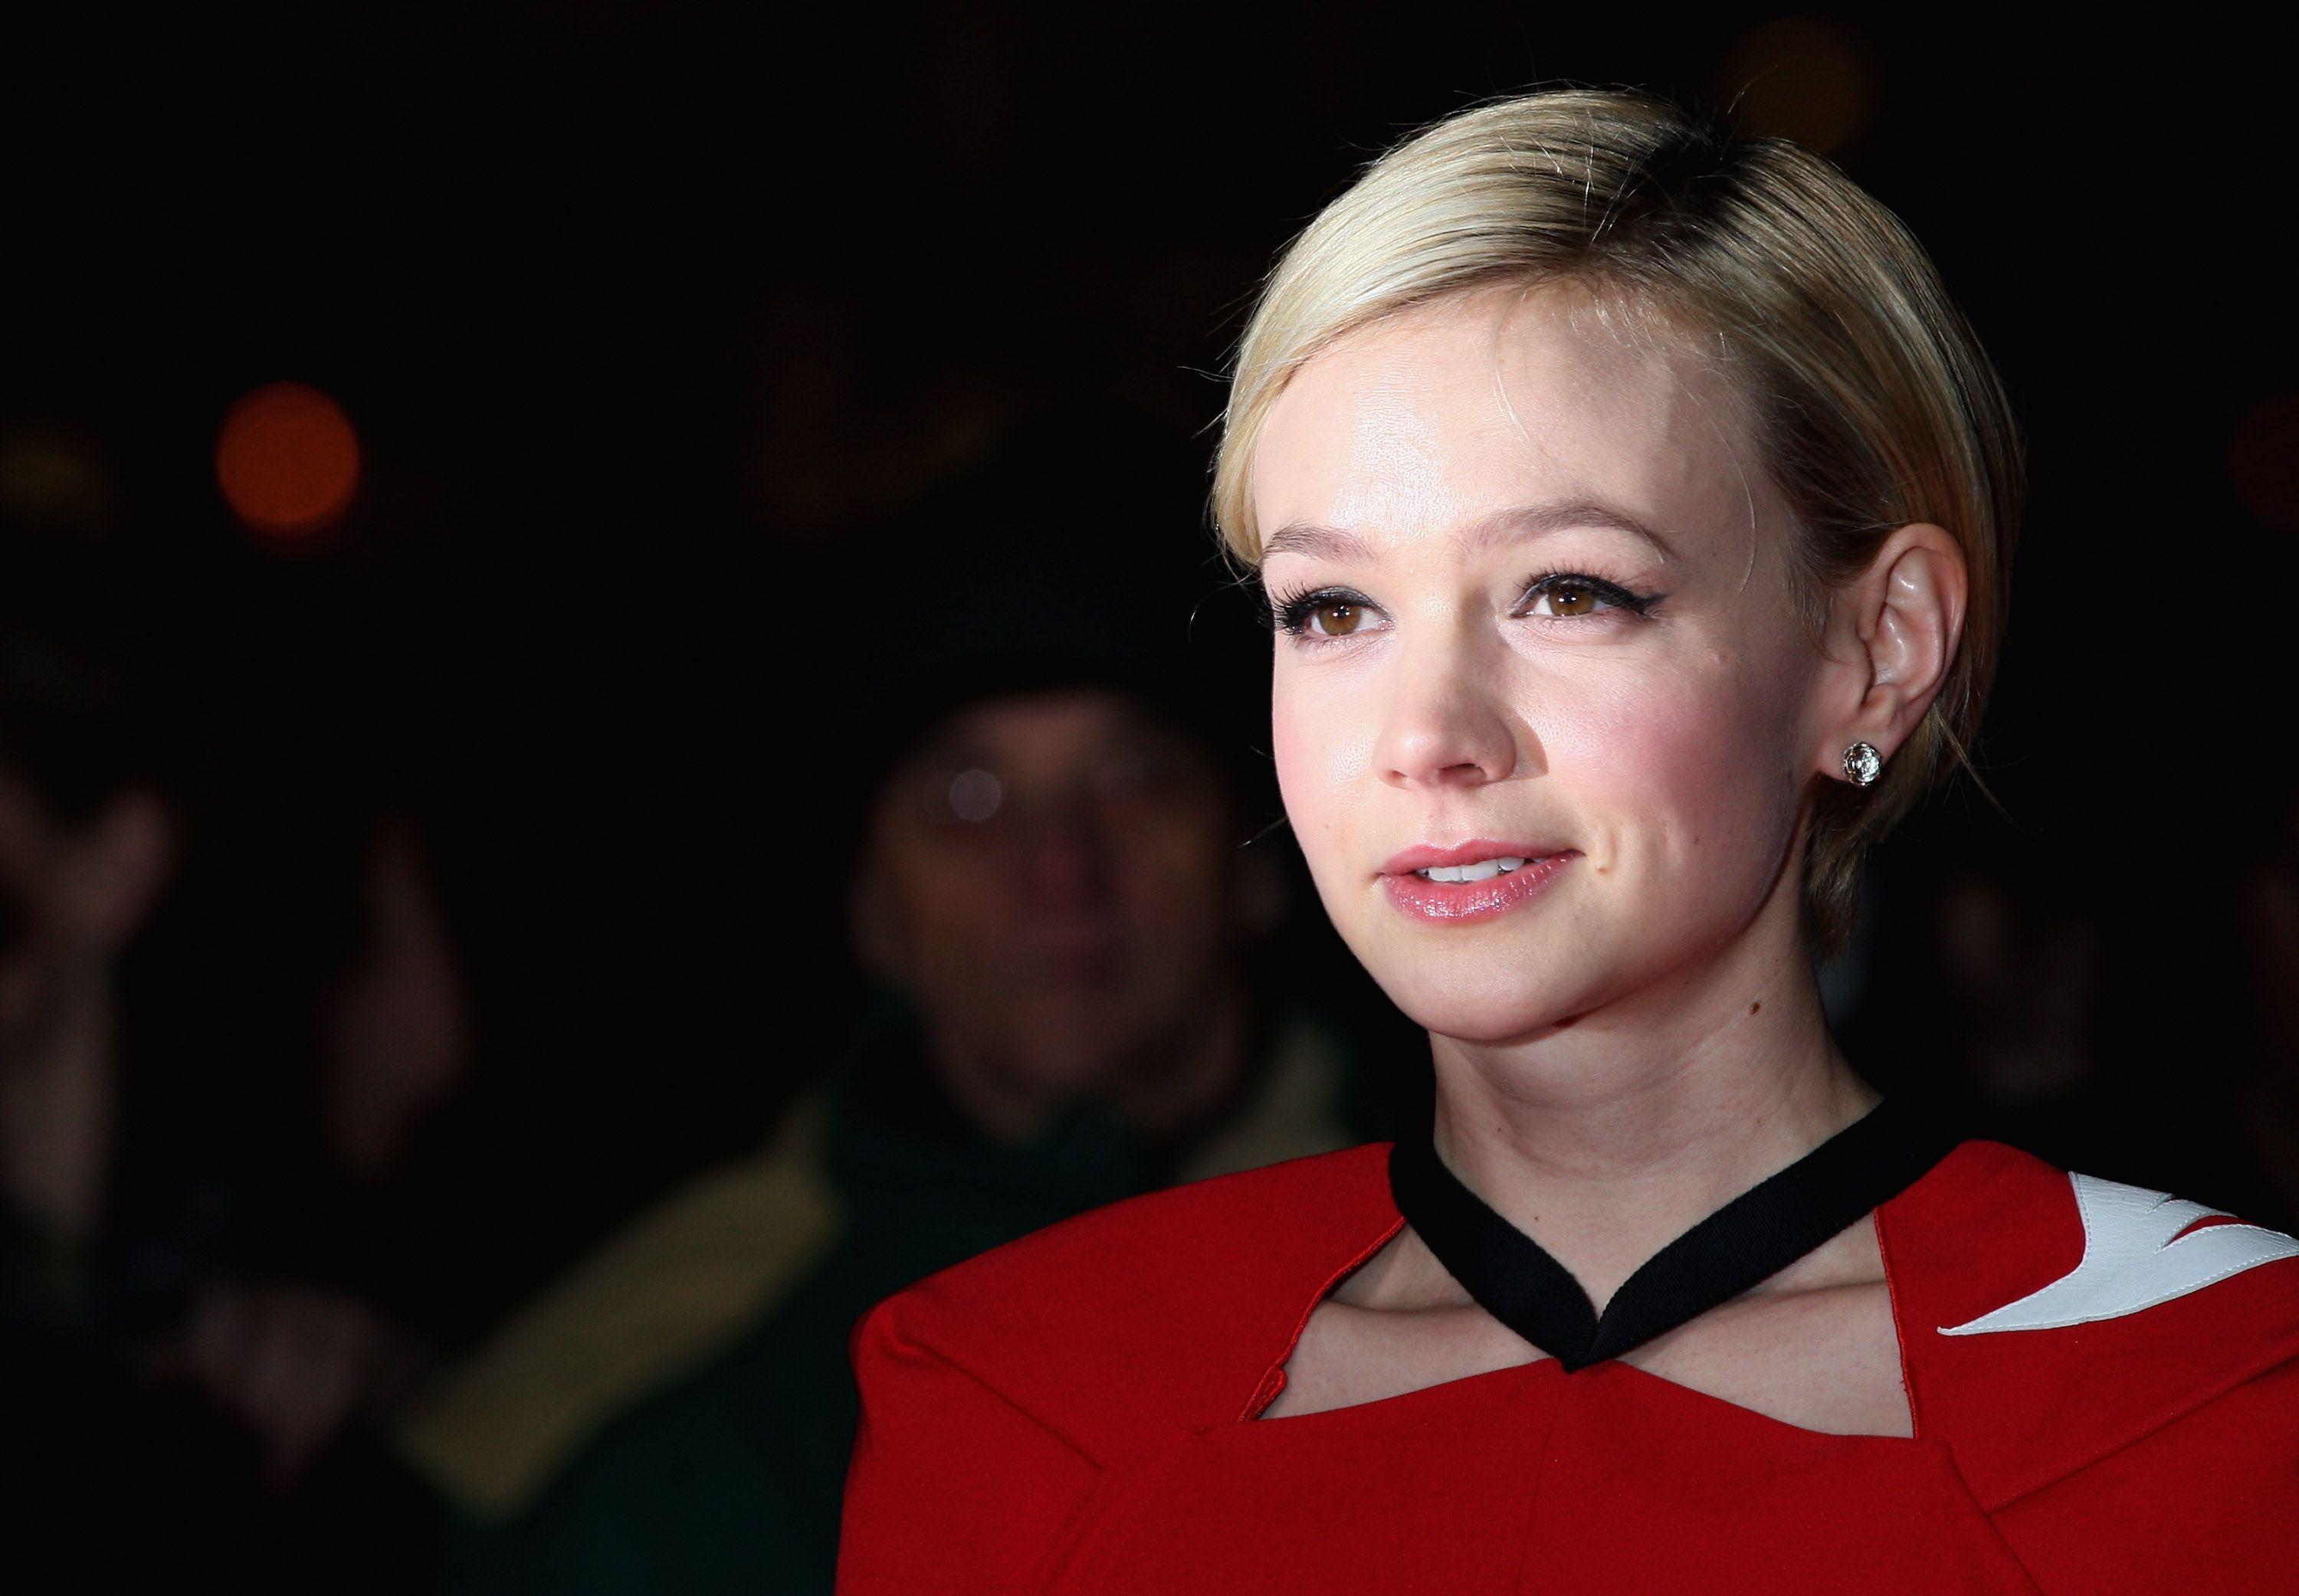 Carey Mulligan&;s pixie cut was perfectly coiffed